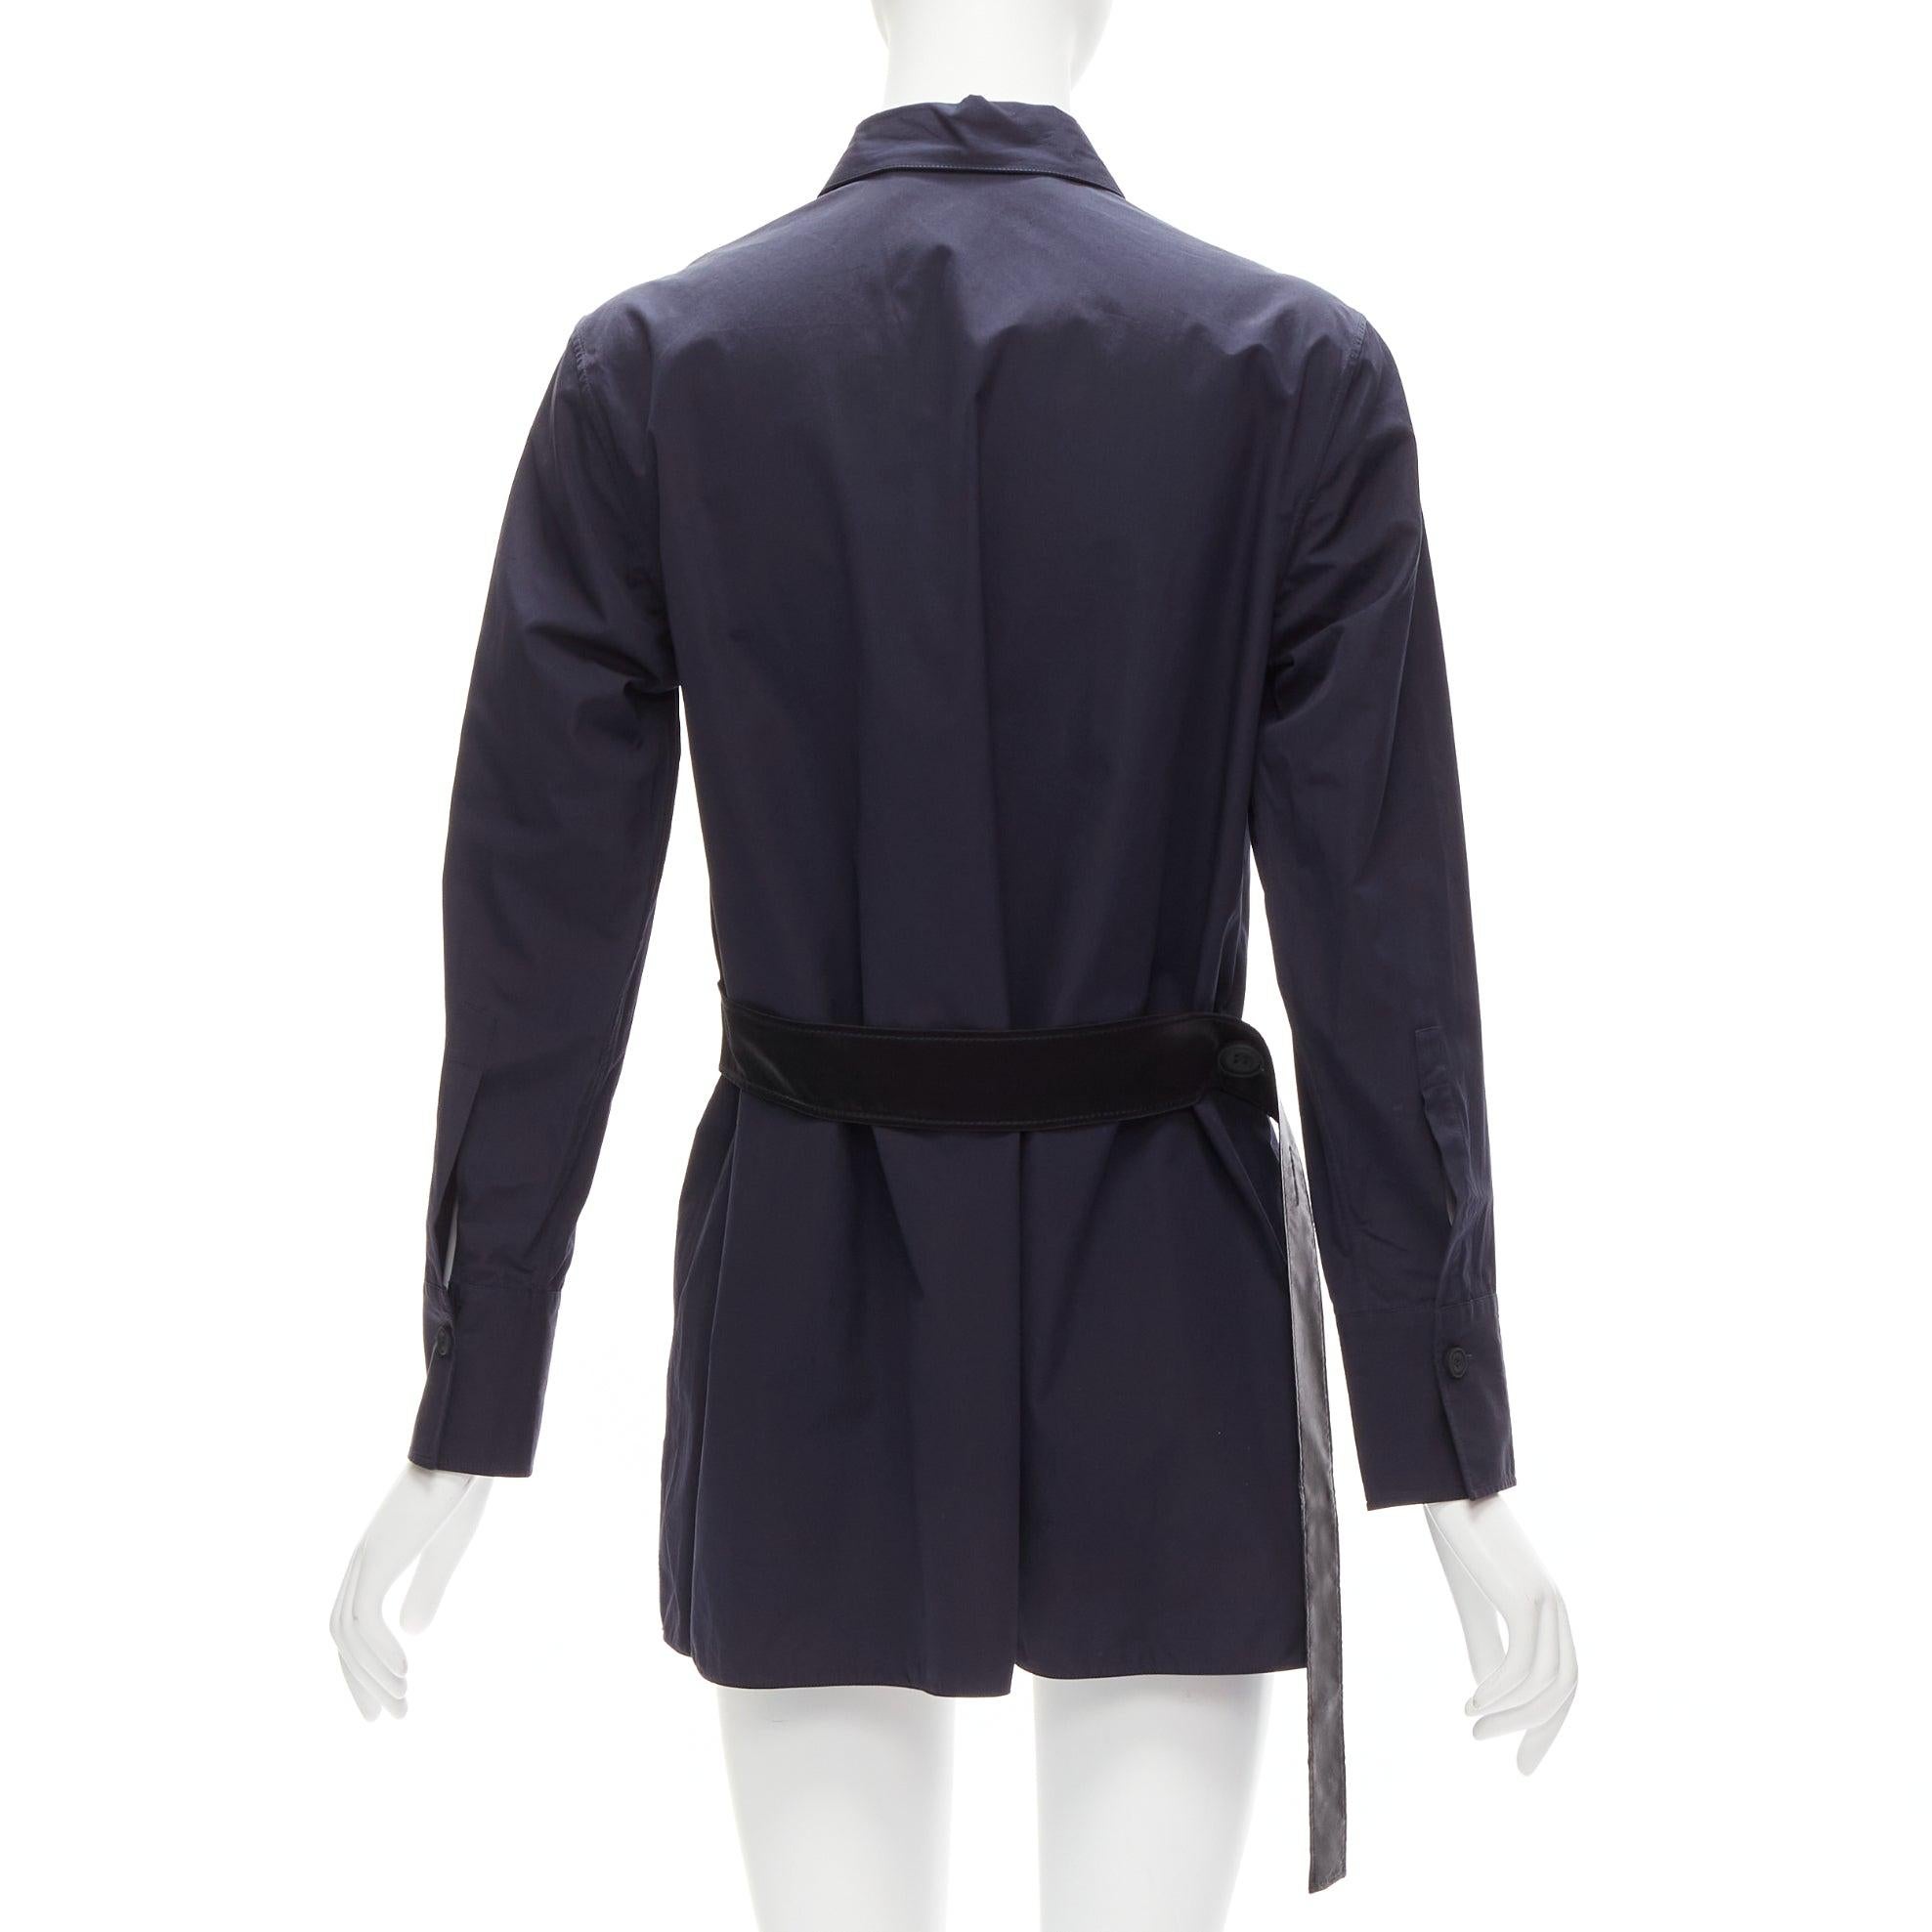 MARNI navy blue cotton rubber button asymmetric belted shirt IT38 XS
Reference: CELG/A00333
Brand: Marni
Material: Cotton
Color: Navy, Black
Pattern: Solid
Closure: Button
Extra Details: Rubber buttons and satin back belt design.
Made in: